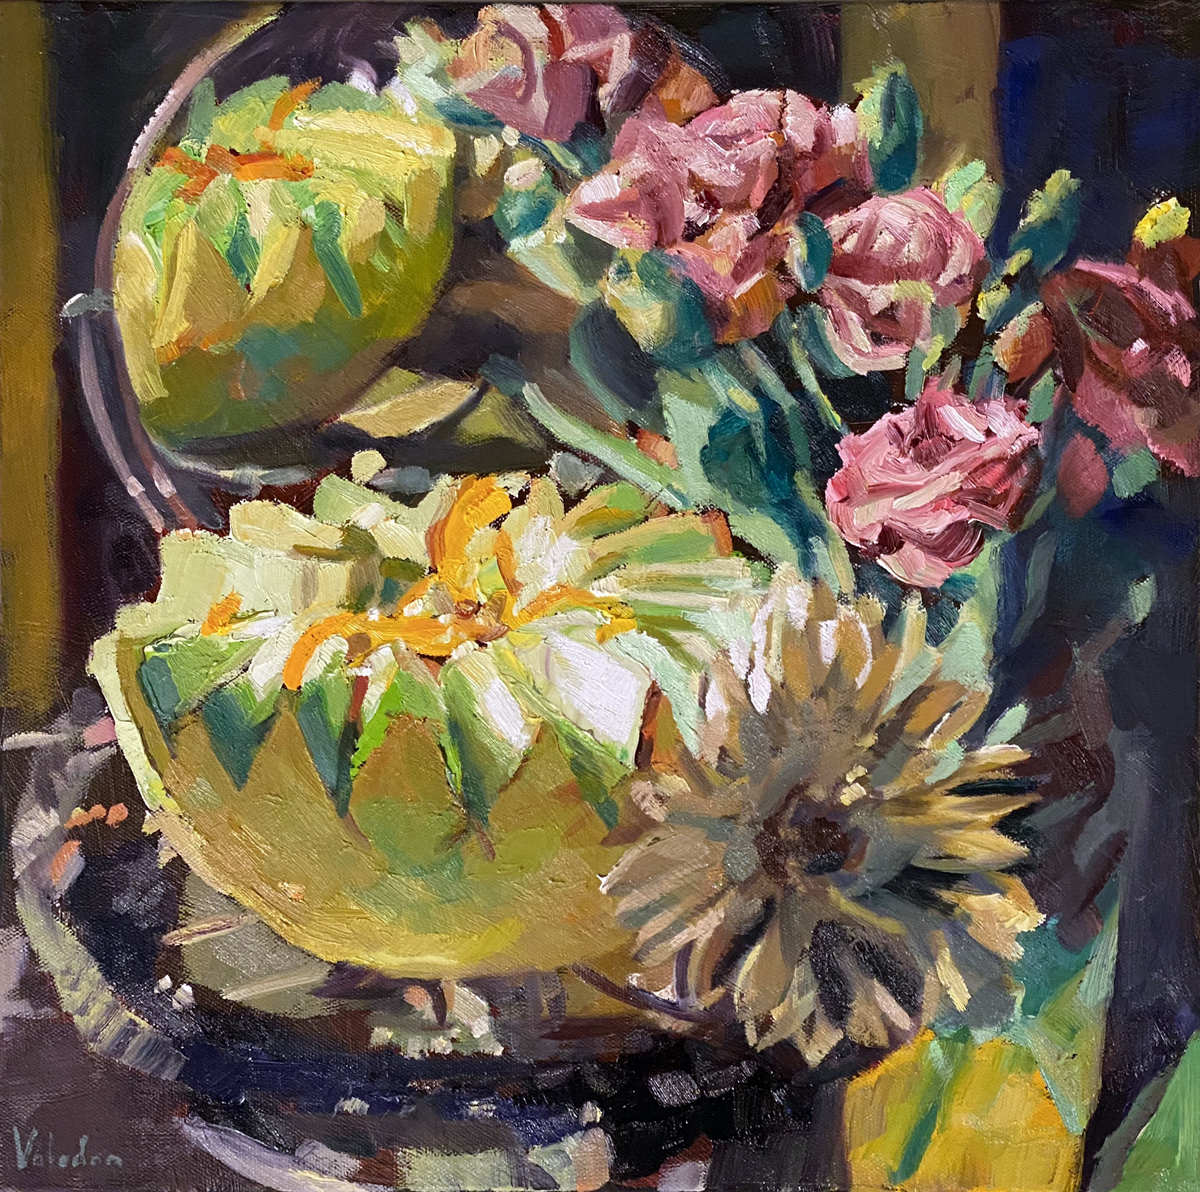 Rosemary Valadon 'Honeydew and Roses' oil on canvas 40 x 40cm $4,500